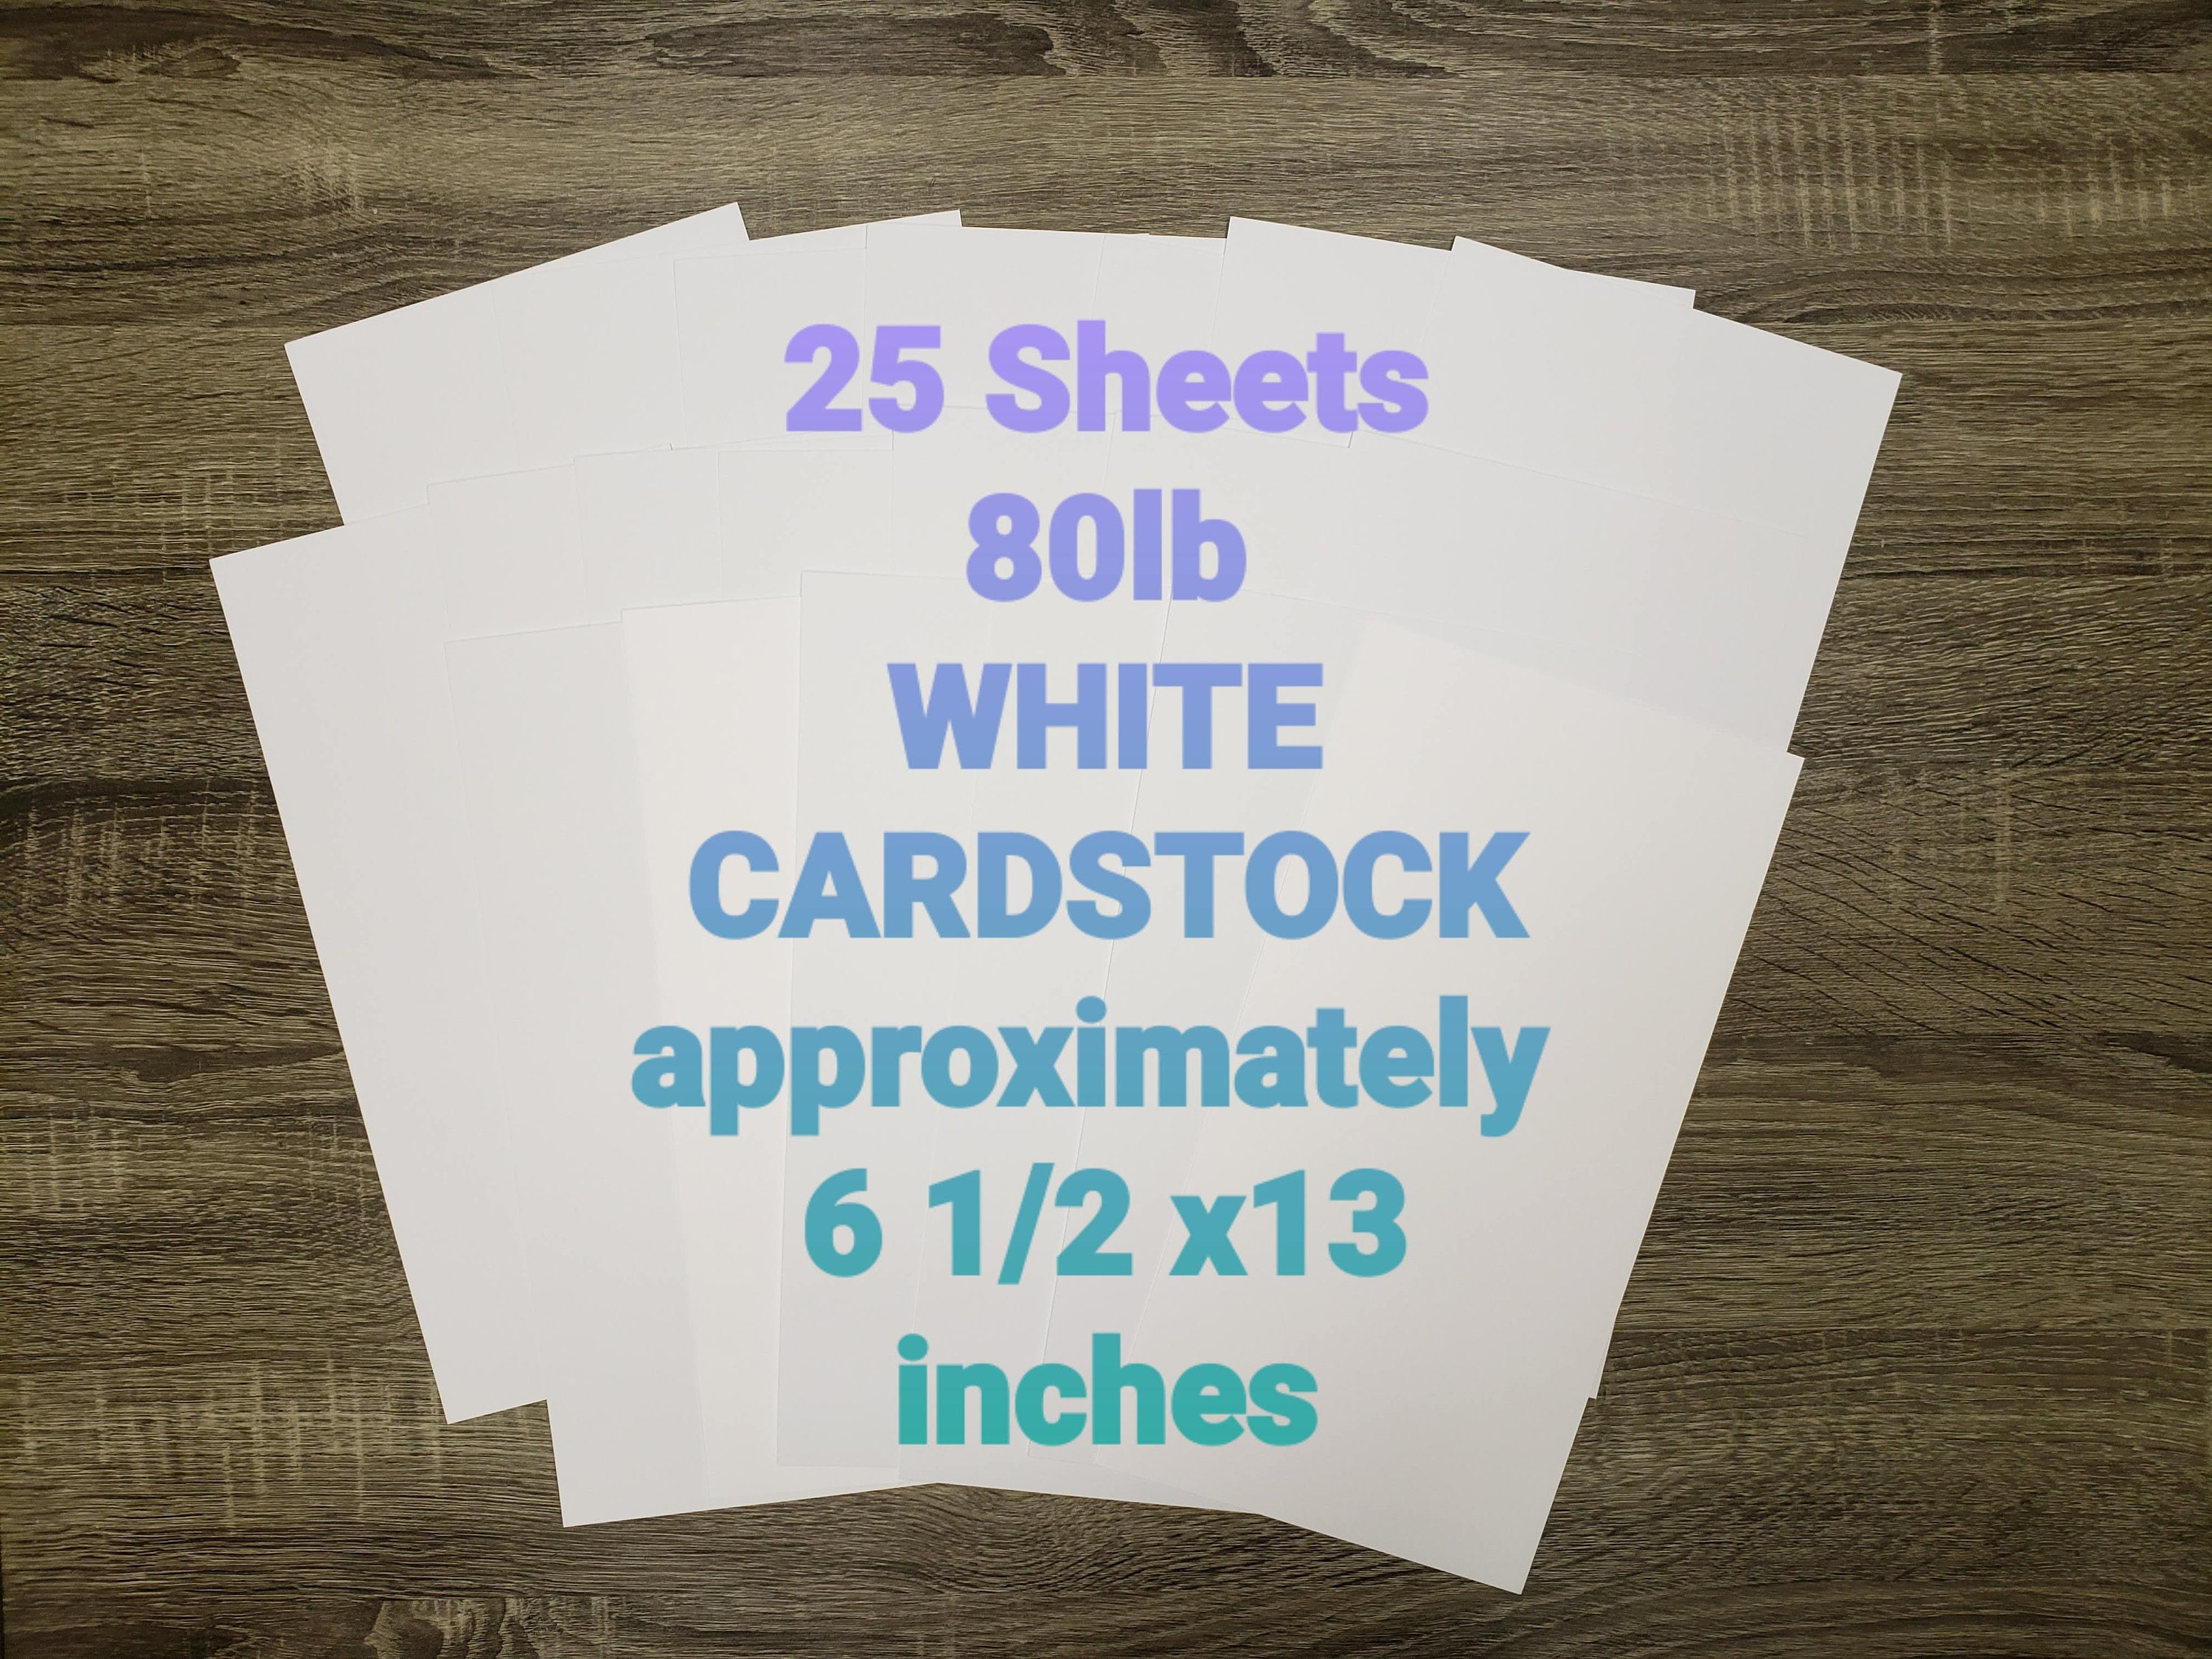 Darice blank cards and envelope set,white, 50 cards/envelopes, paper  crafting, card making, premium heavy weight cardstock, scored, 4X5